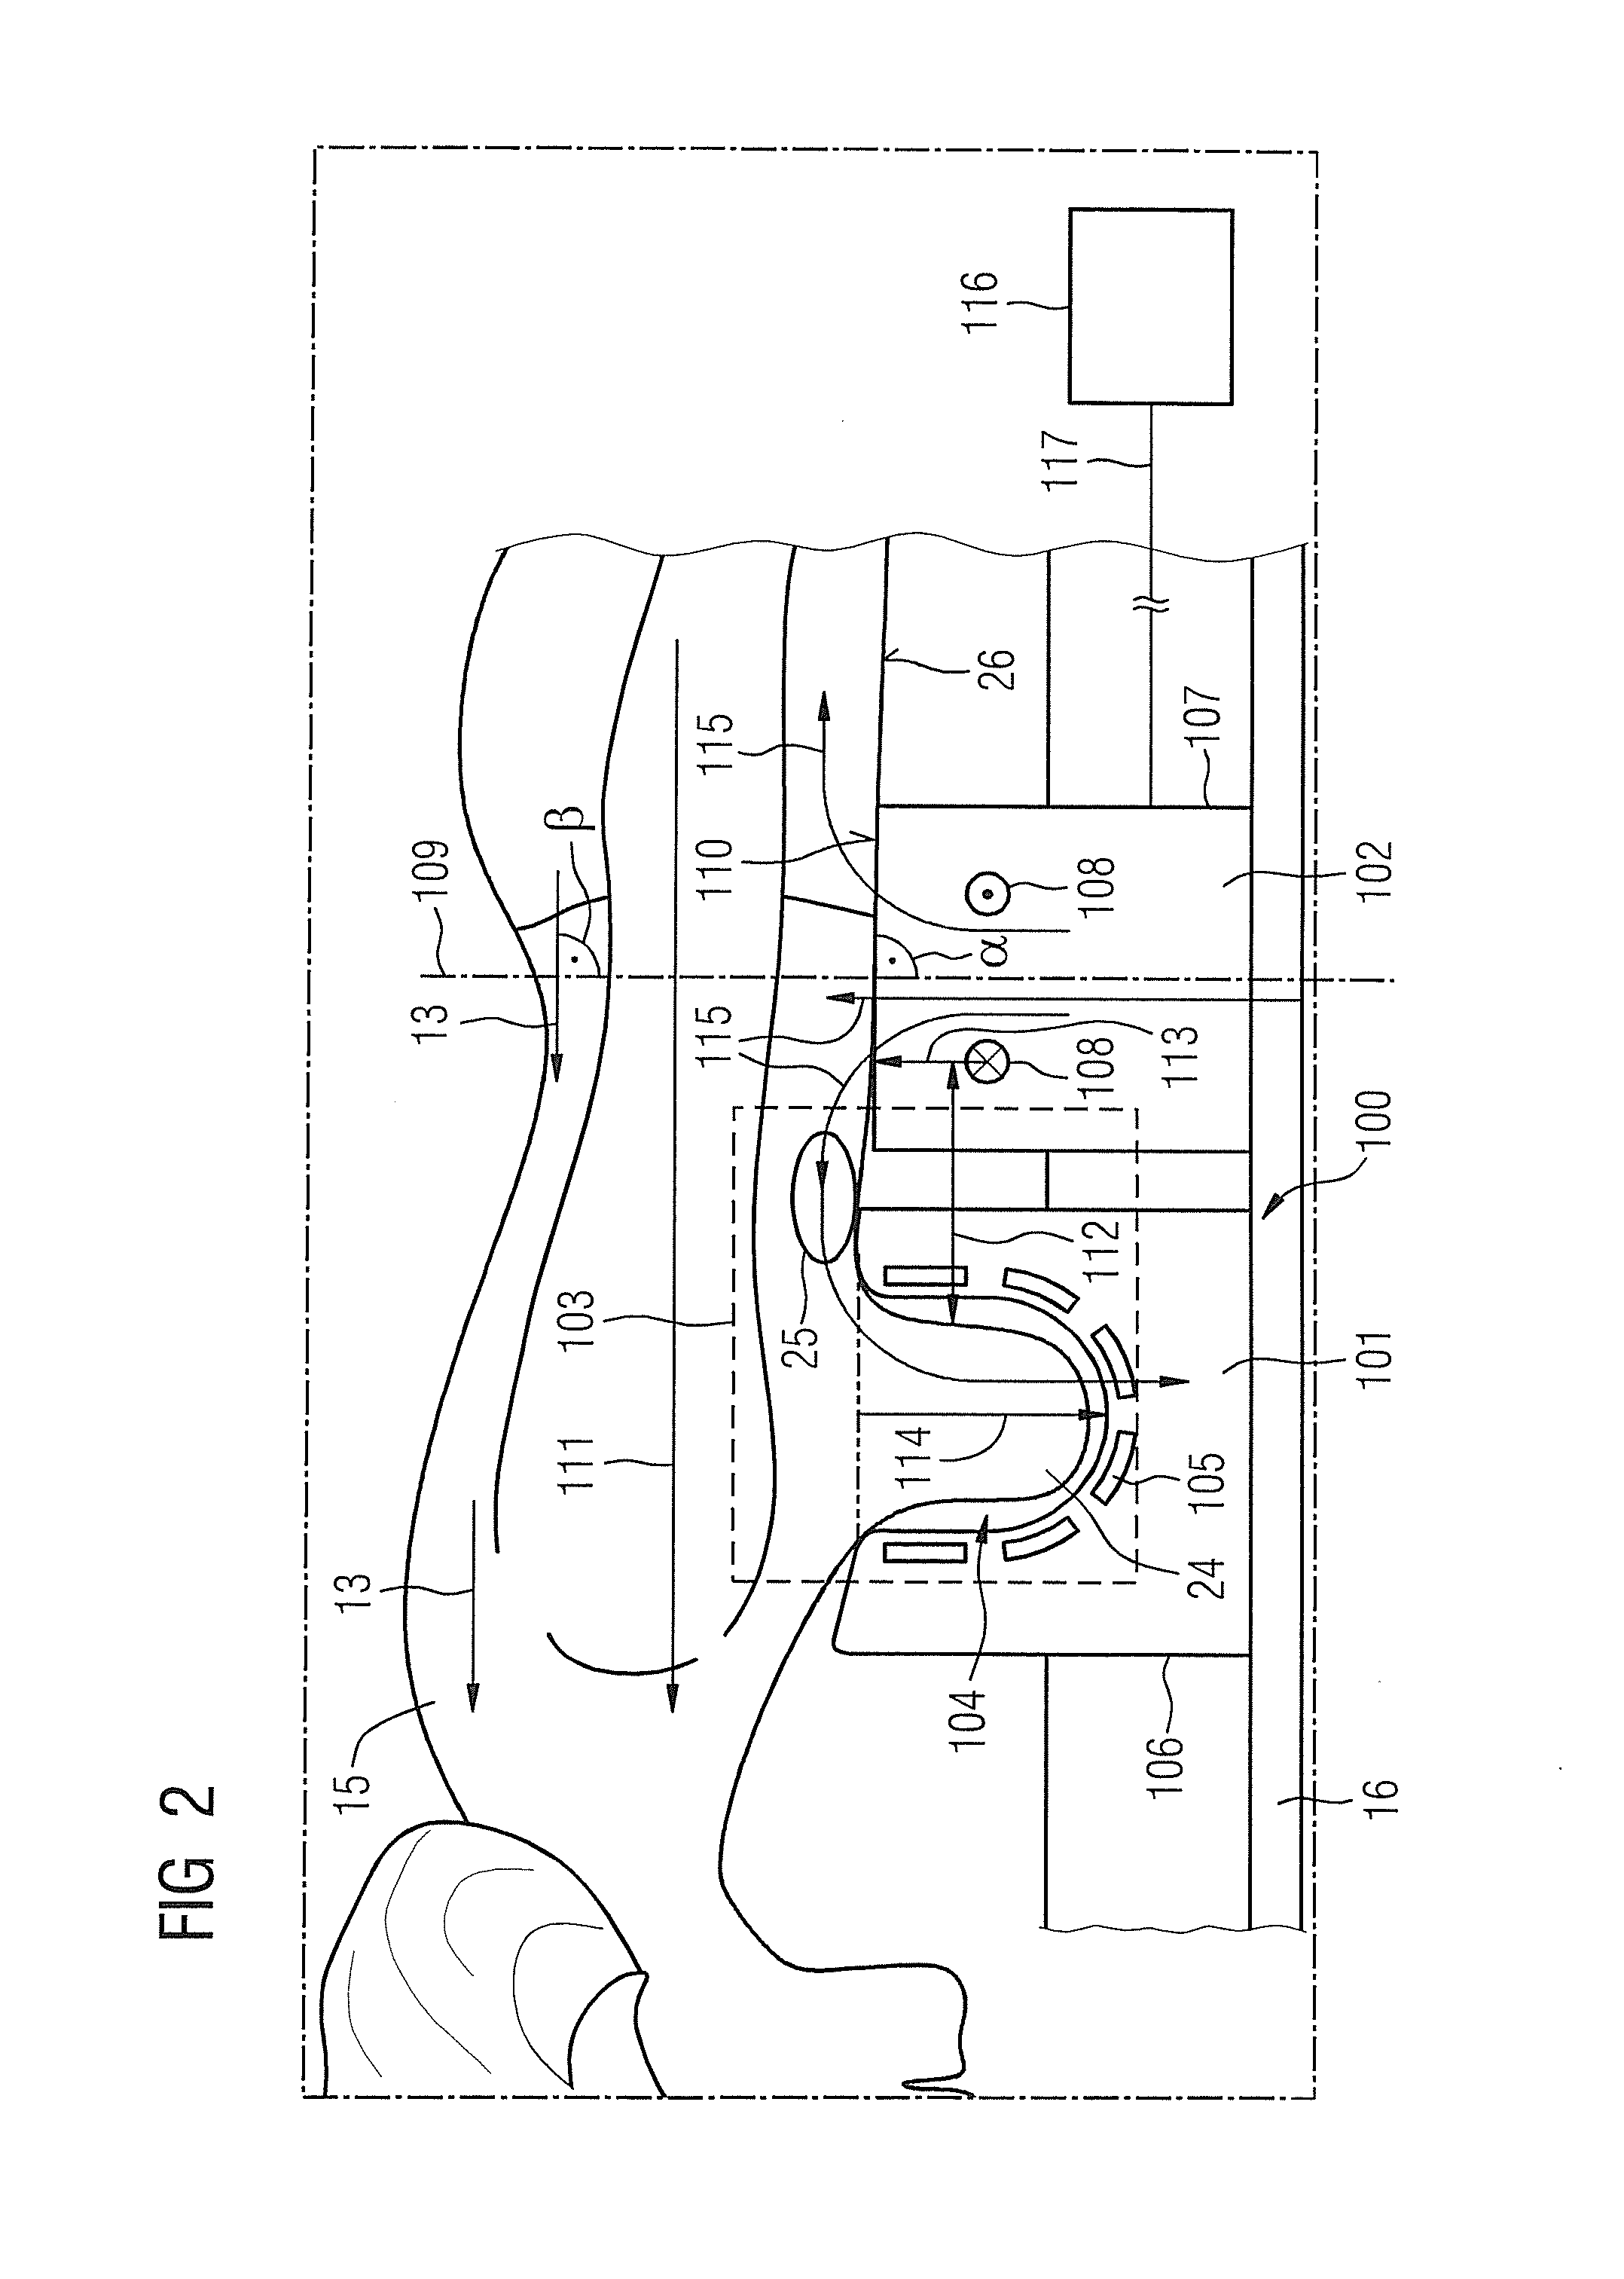 Shim coil device and a magnetic resonance coil system having a shim coil device